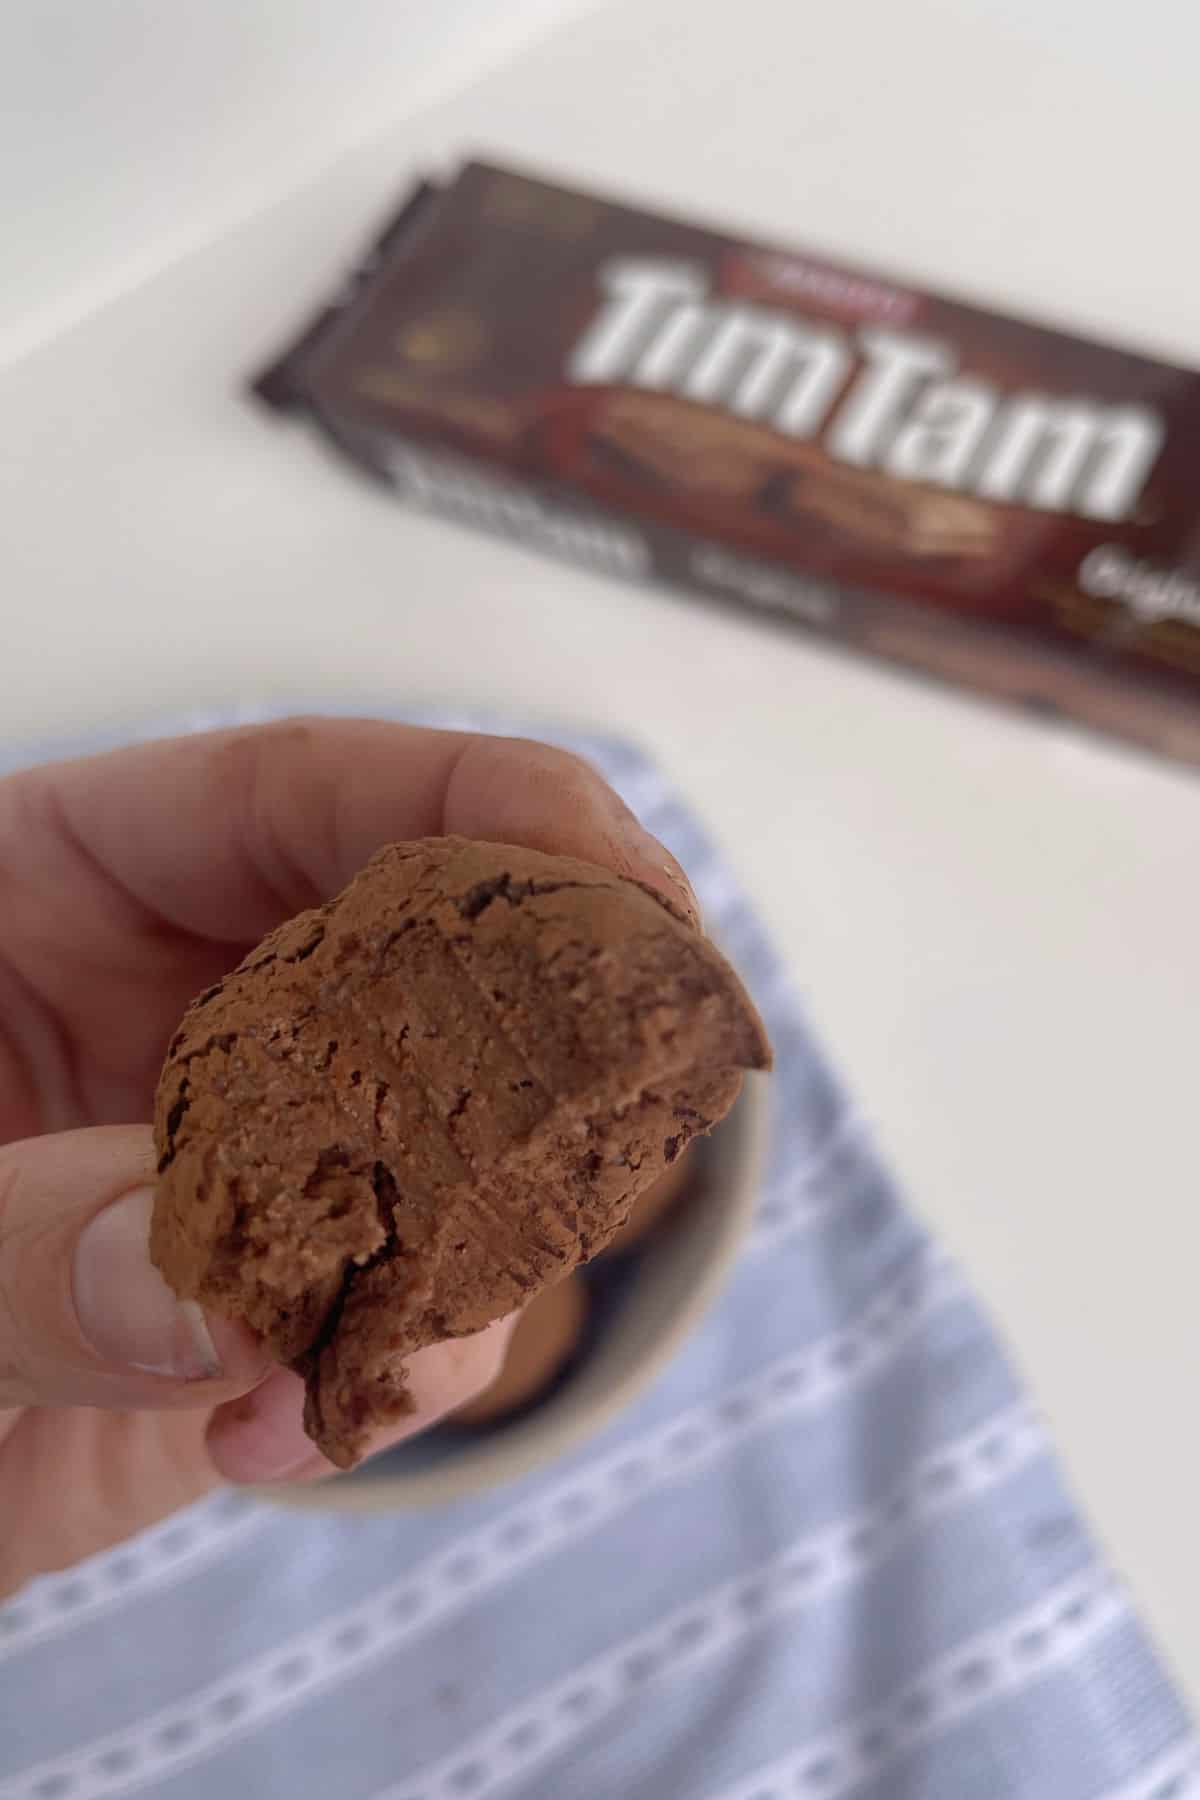 Tim Tam ball being held by an adult with a bite taken out of it.